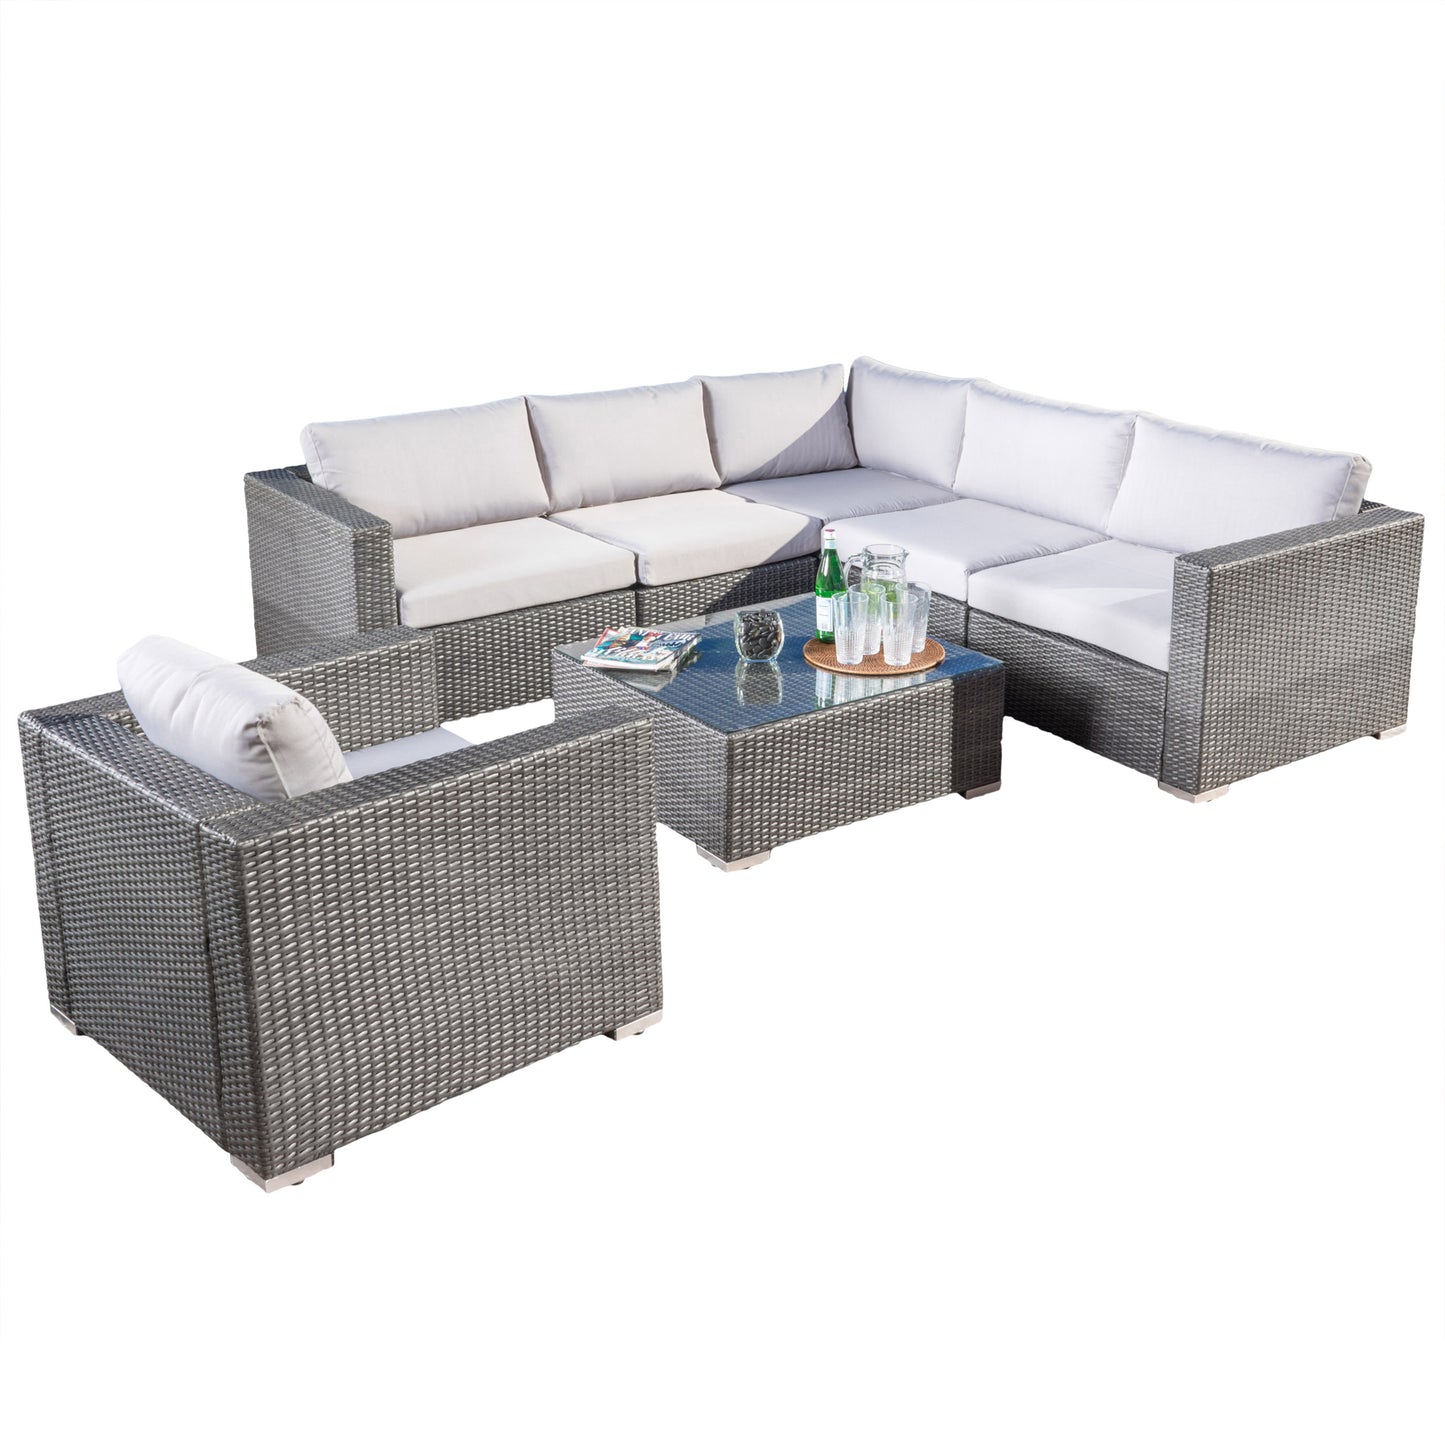 Francisco 7pc Outdoor Gray Wicker Seating Sectional Set w/ Cushions